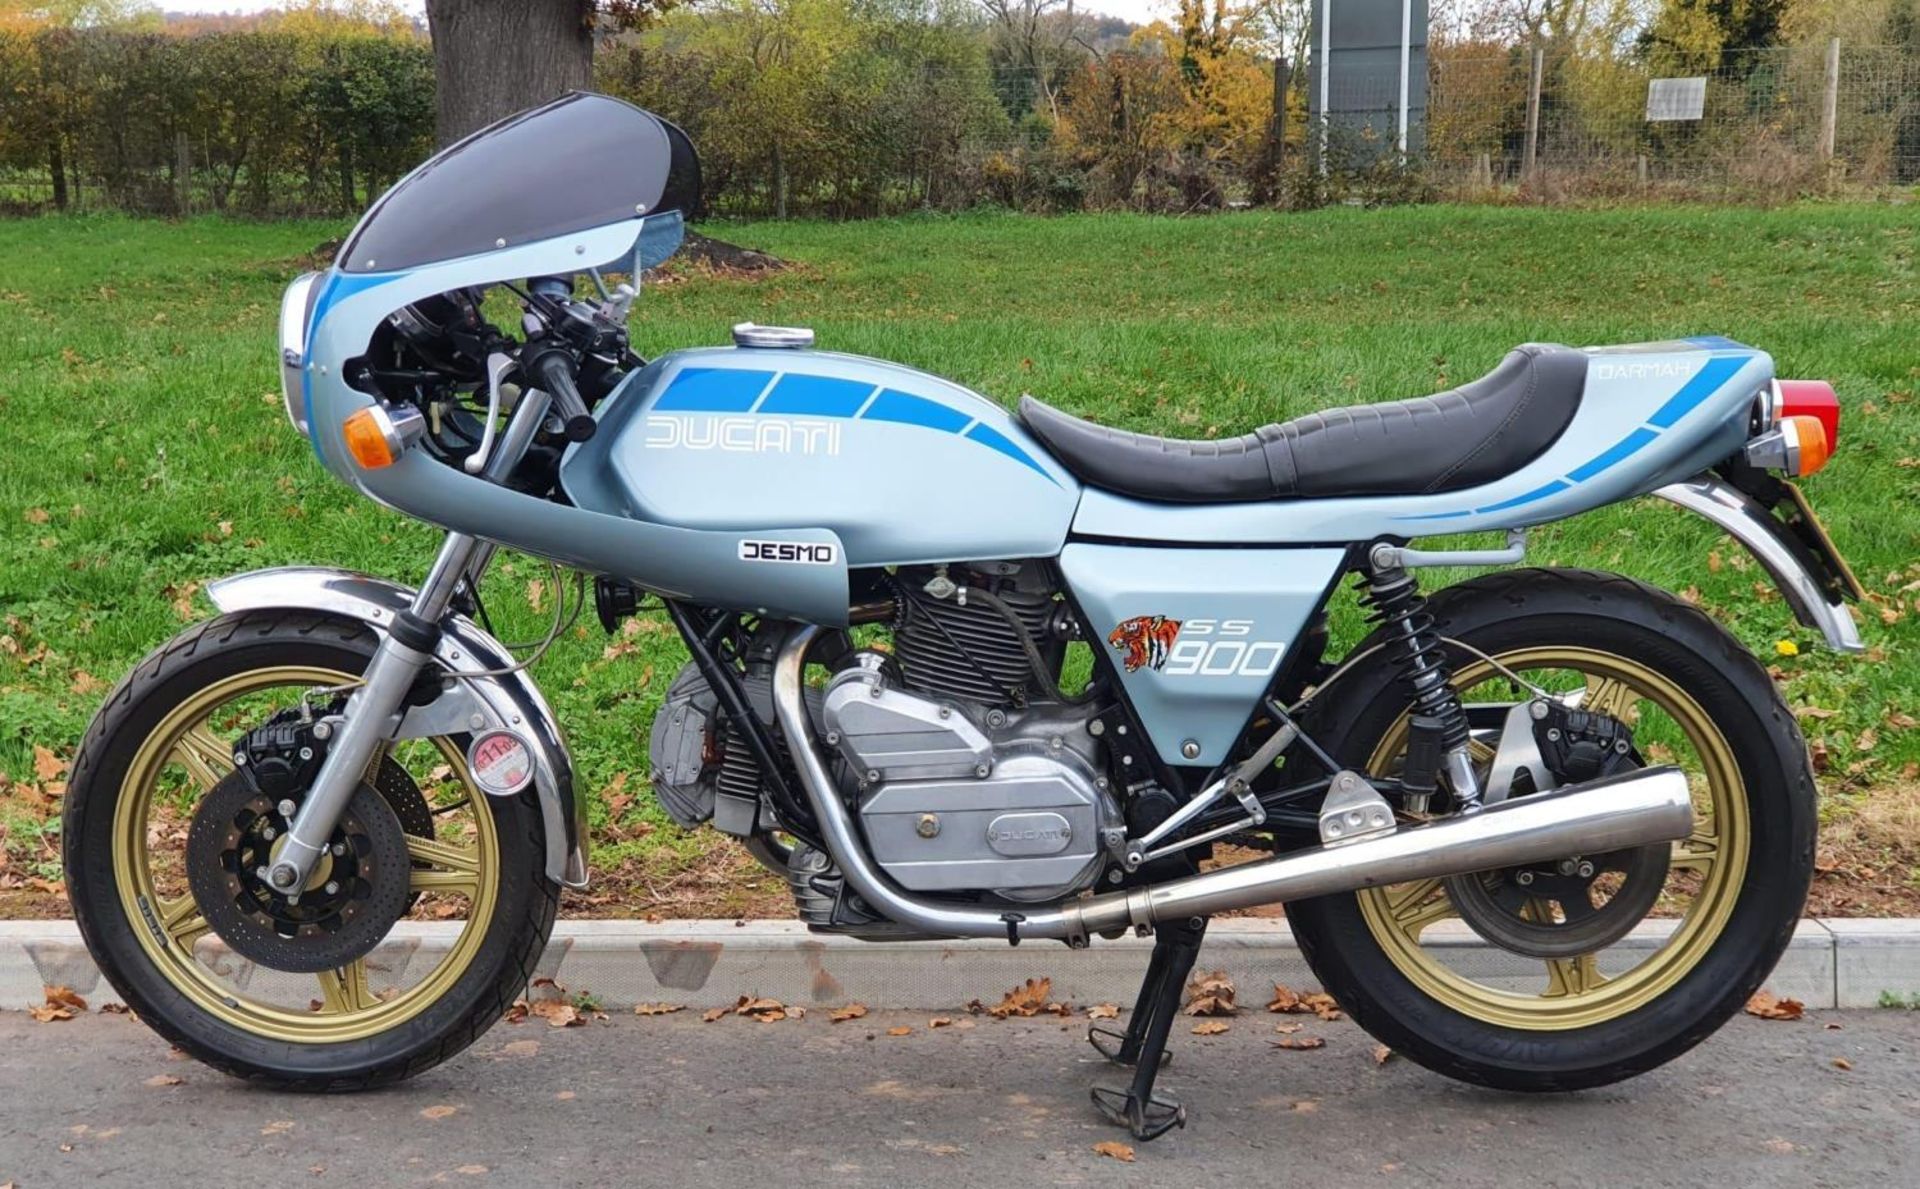 Ducati SS900 motorcycle. 1979. 864cc. Frame no. 903123 Engine no. 903529, please note these - Image 2 of 7